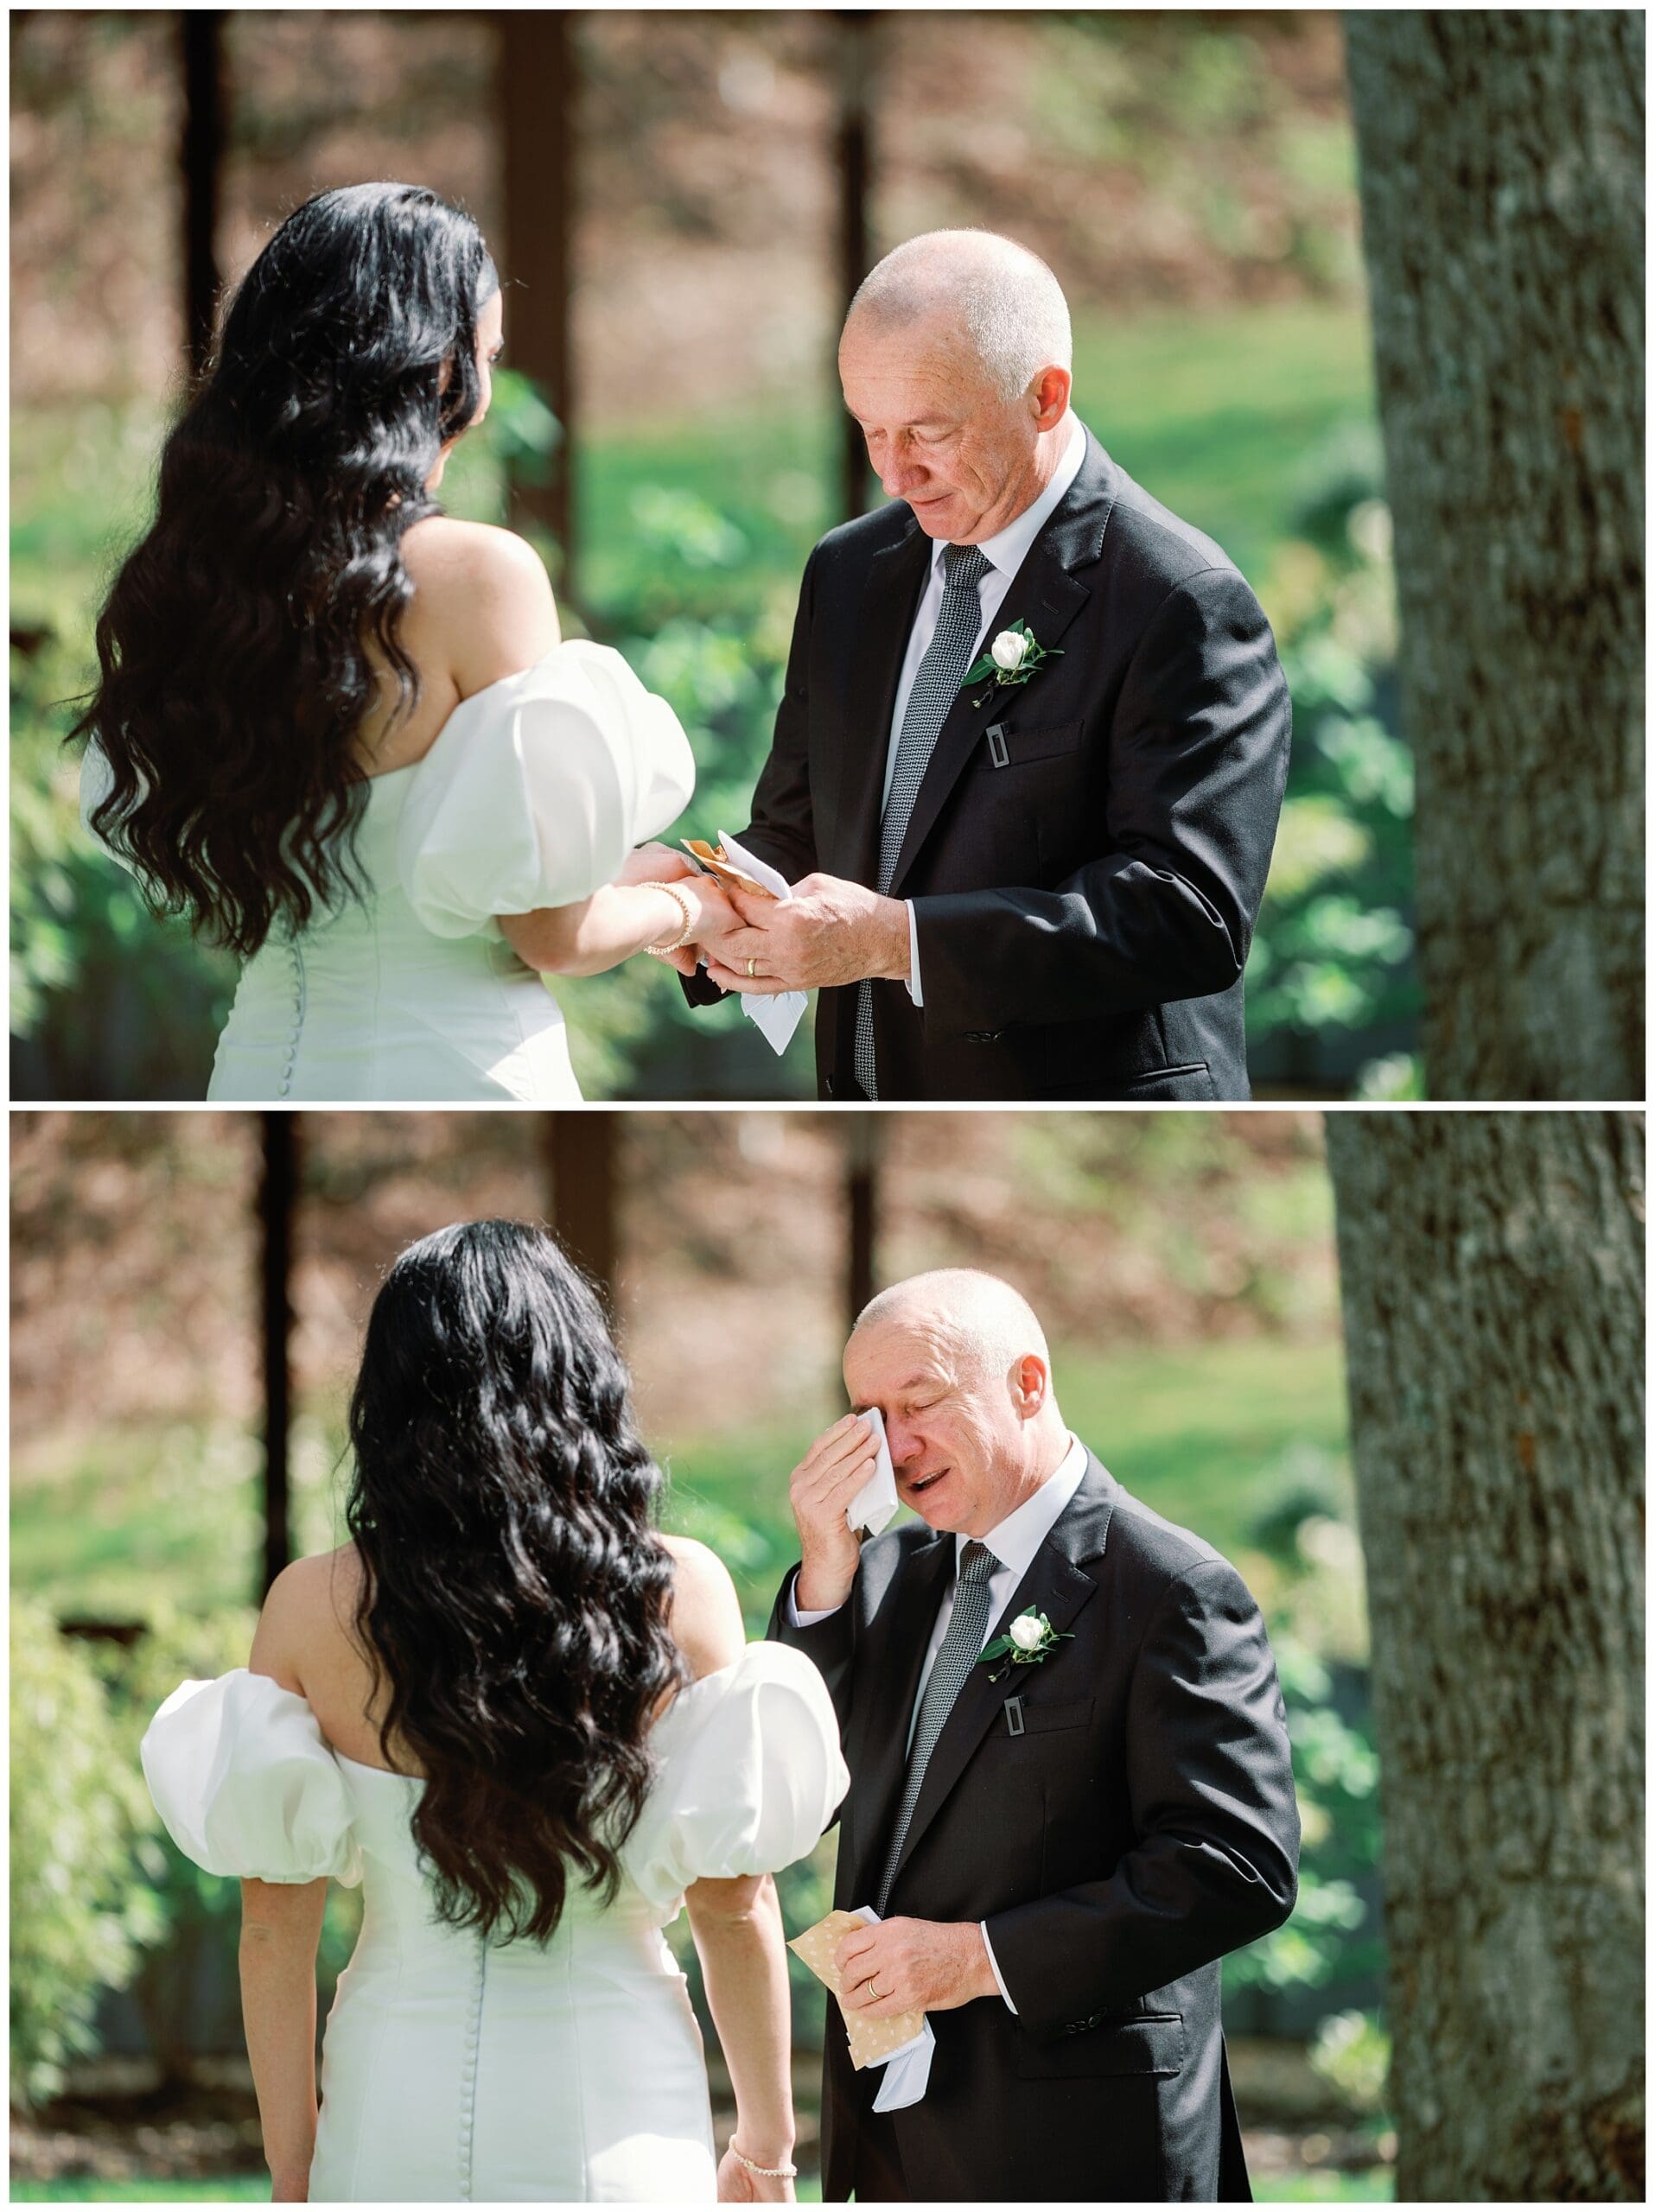 A bride and her father exchange emotional gestures during a sunlit outdoor ceremony, with the father wiping away a tear.